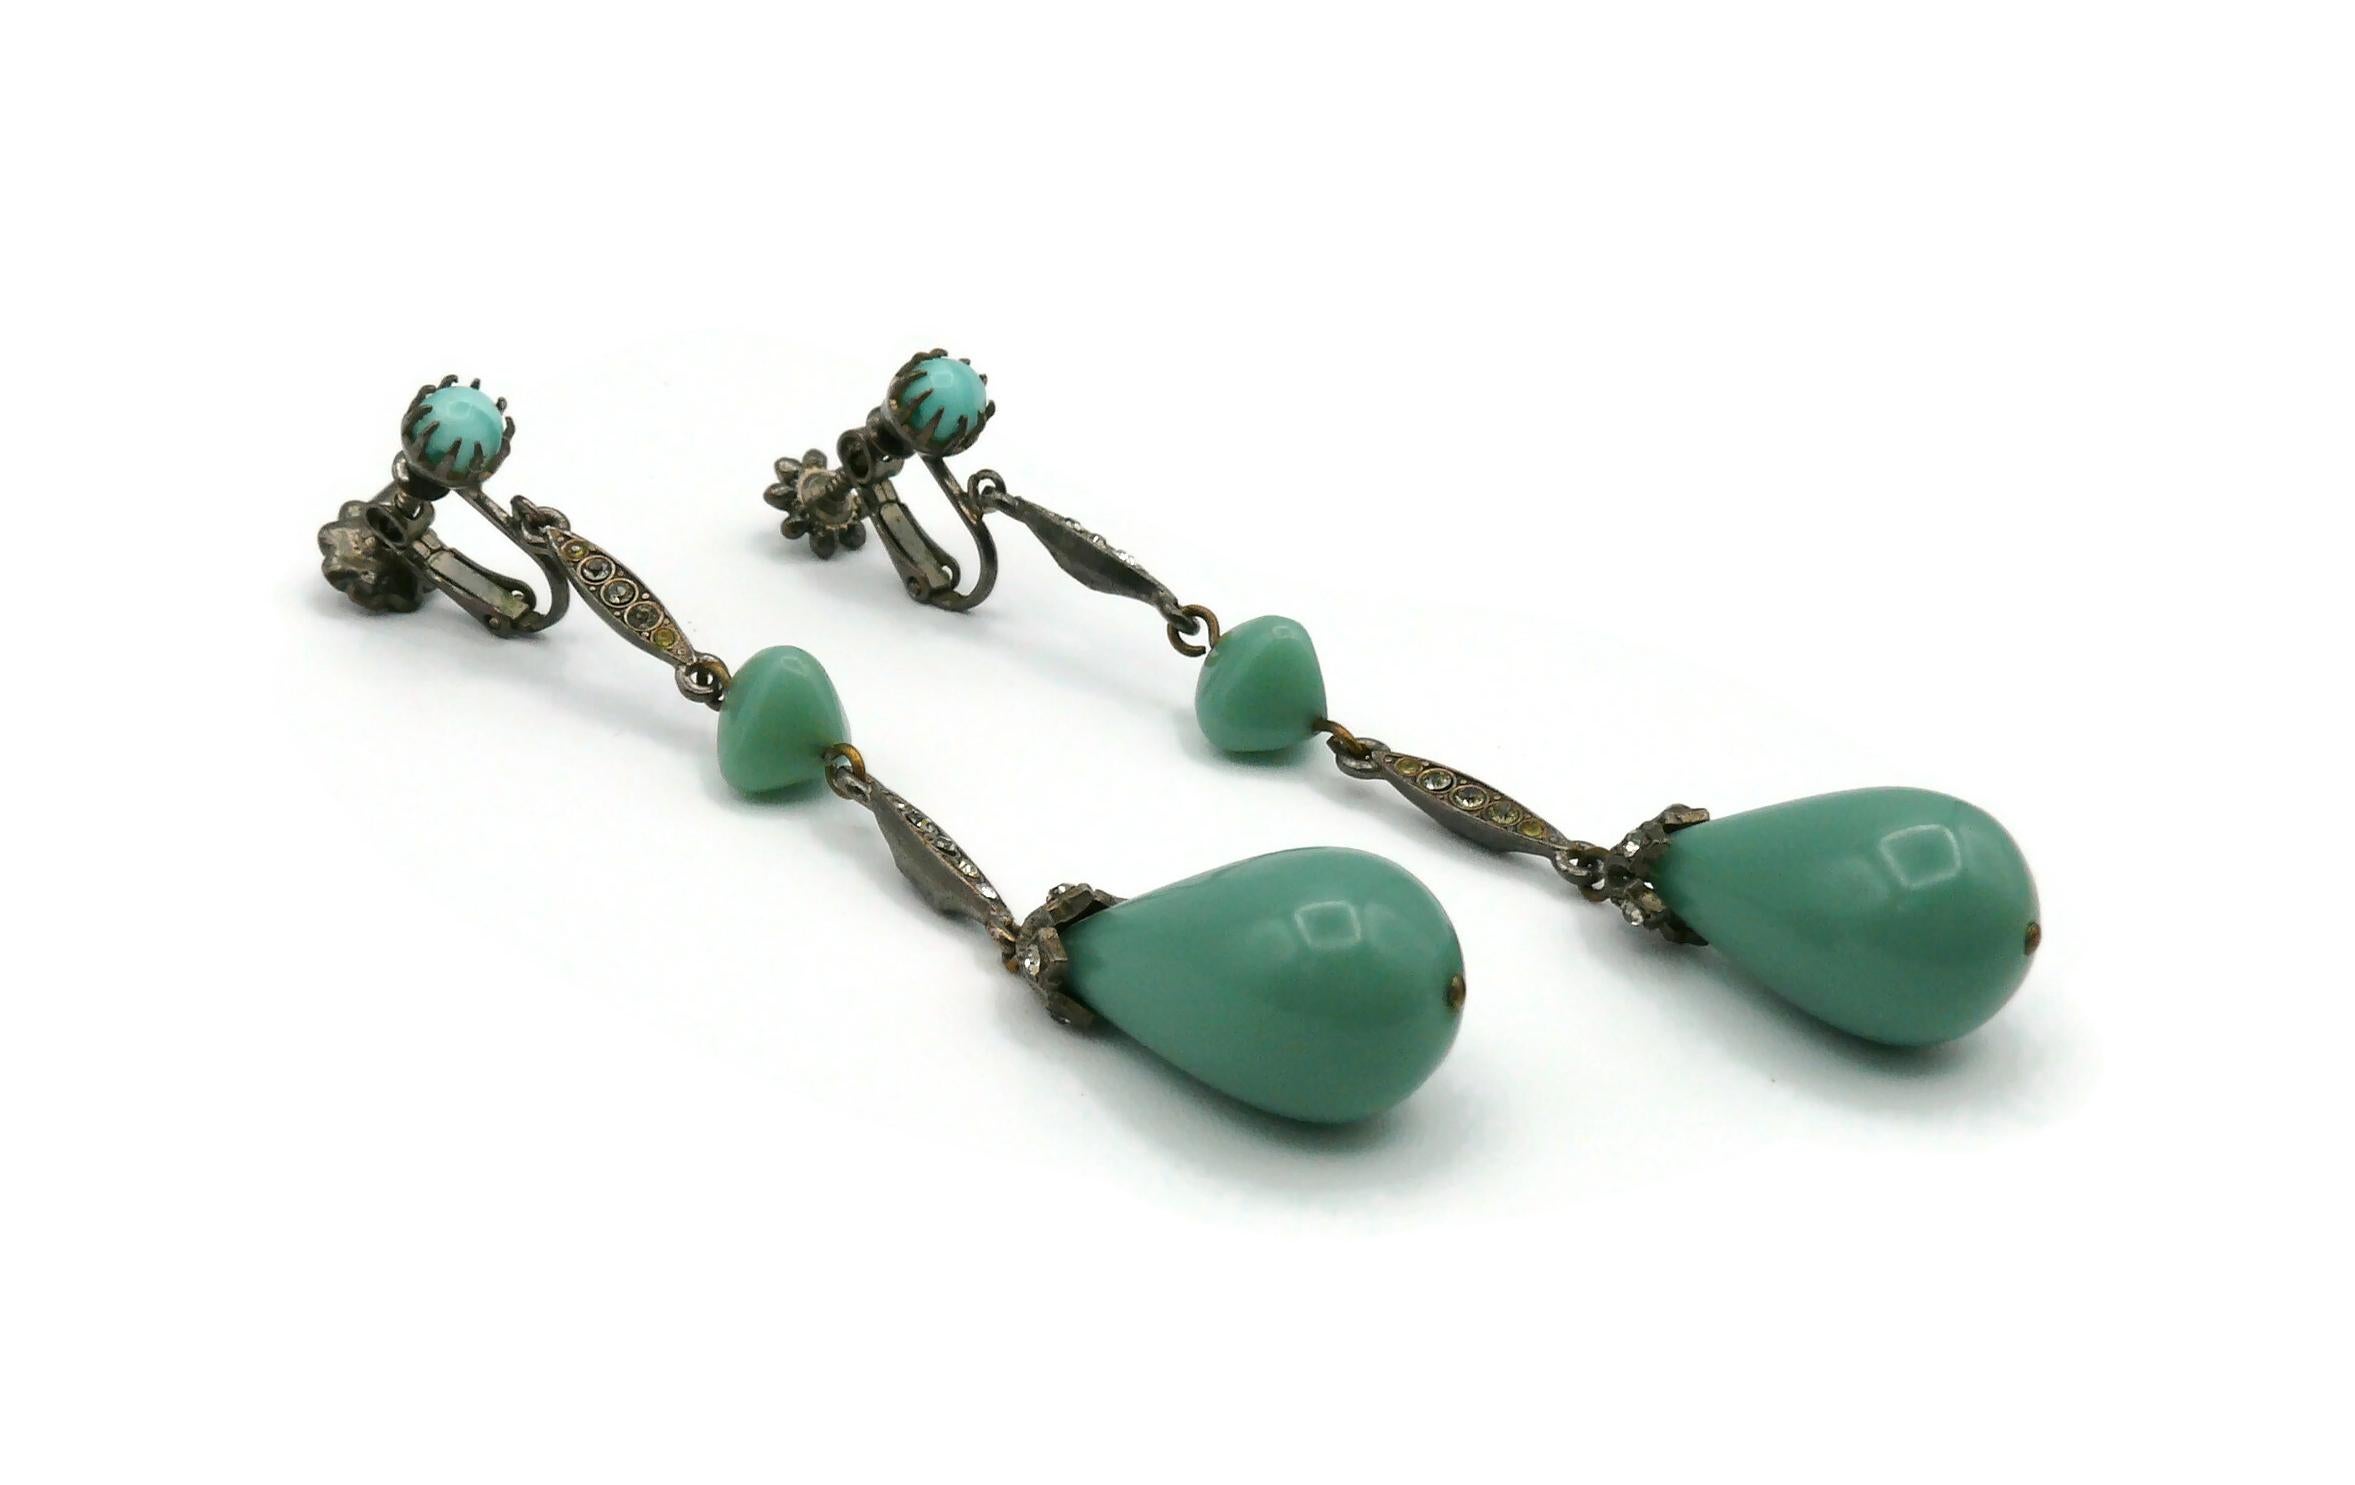 Christian Dior Boutique Vintage Victorian Insipred Faux Jade Dangling Earrings For Sale 1